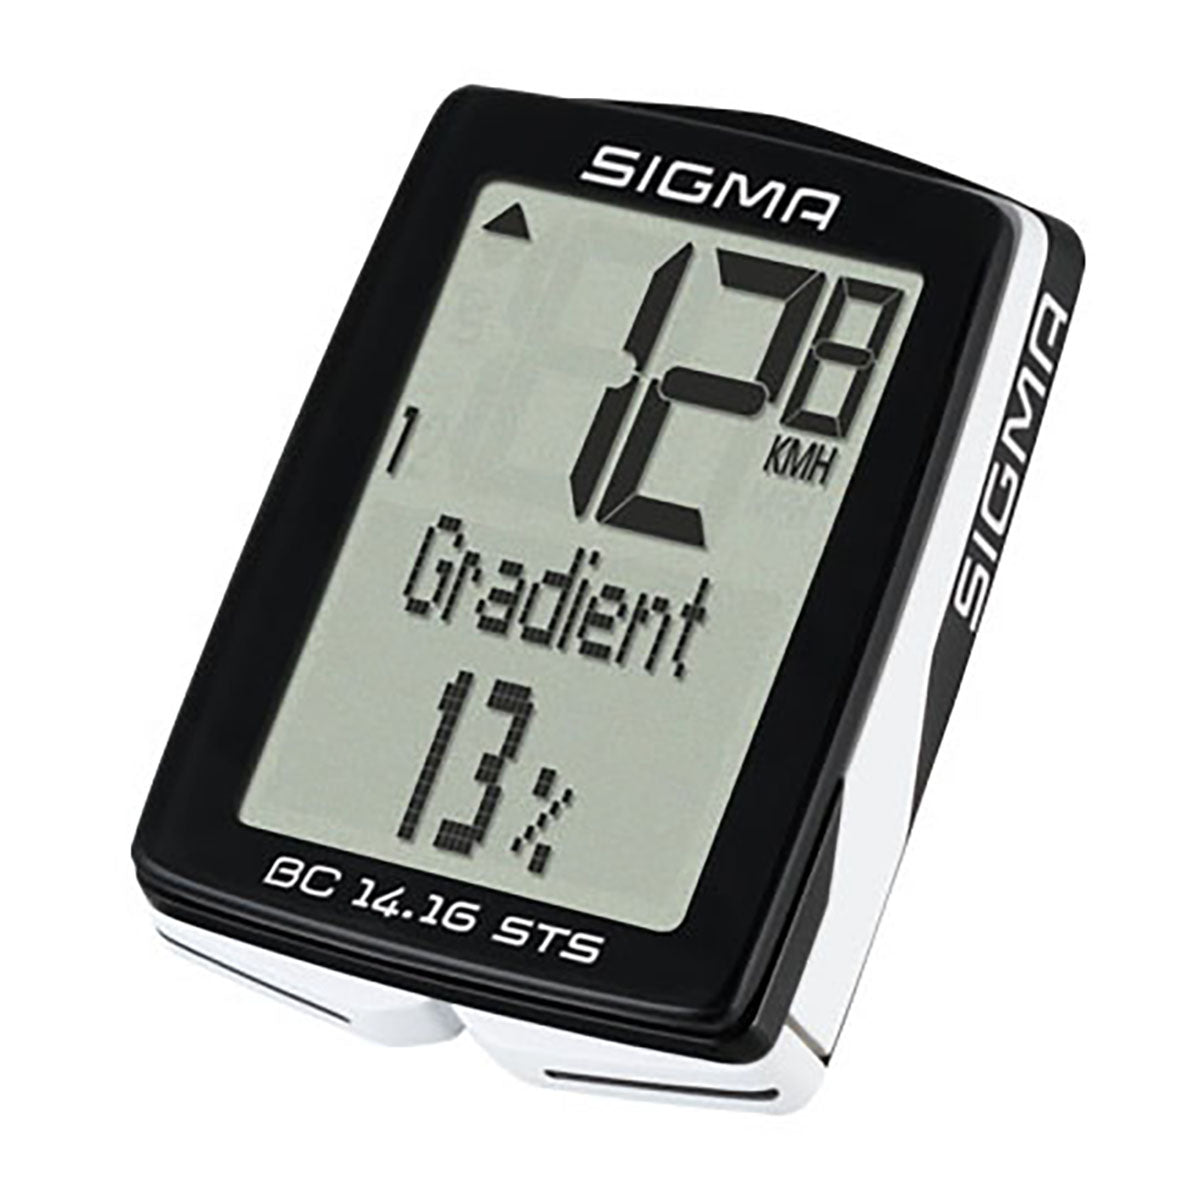 SIGMA Bicycle Computer - BC 14.16 STS, Wireless - ZEITBIKE